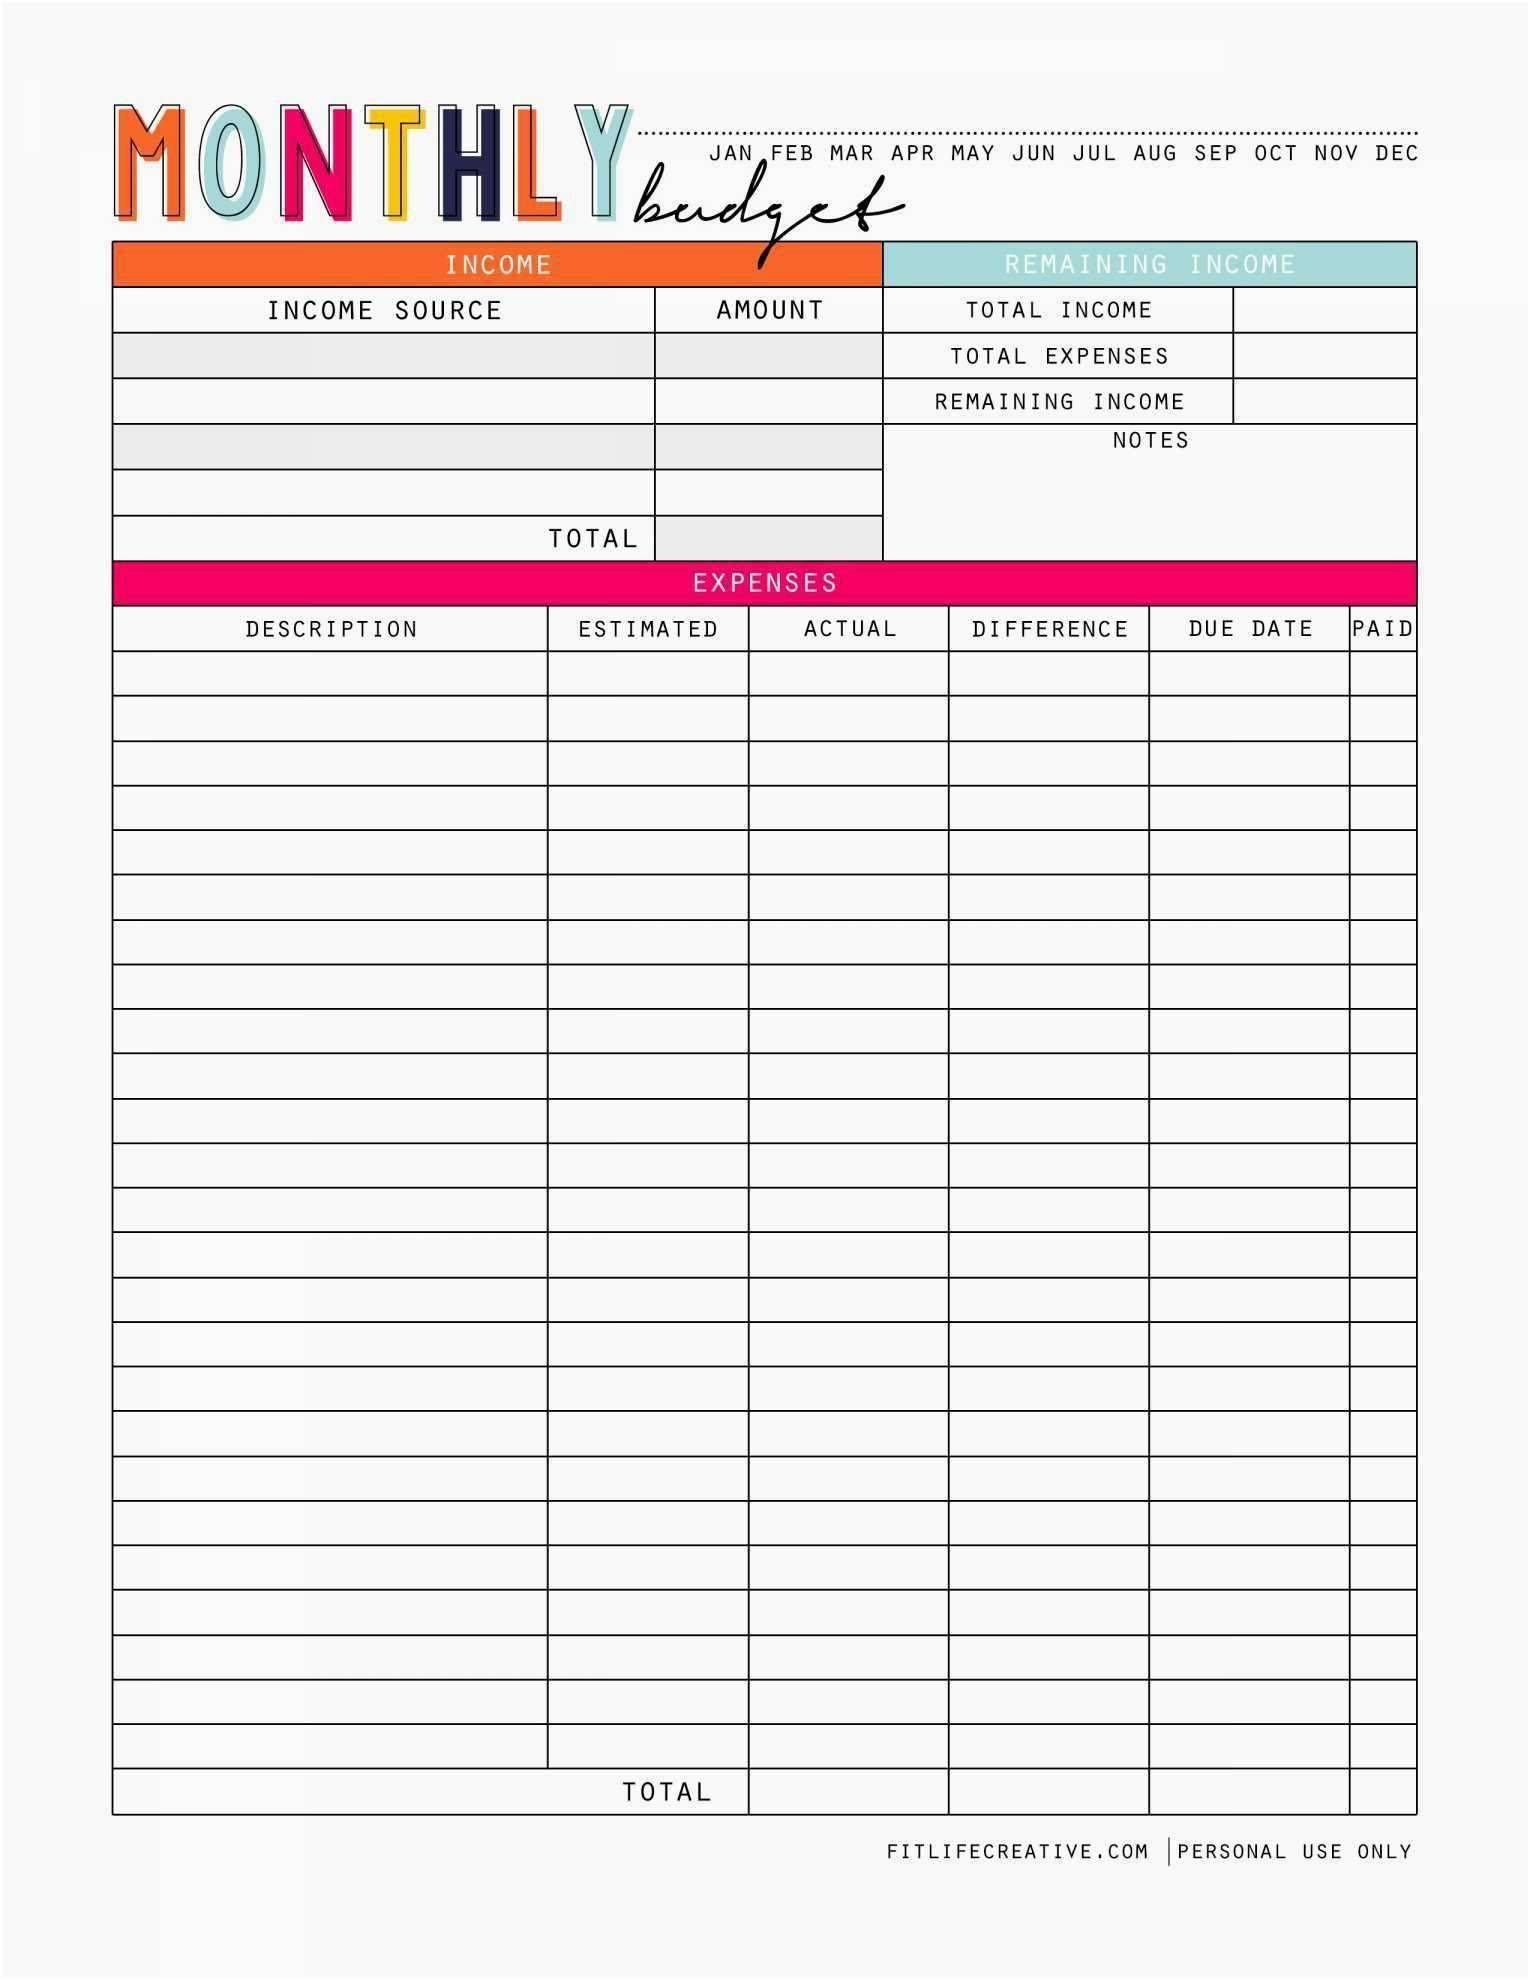 Wholesale Spreadsheet Intended For Wholesale Line Sheet Template  Heritage Spreadsheet